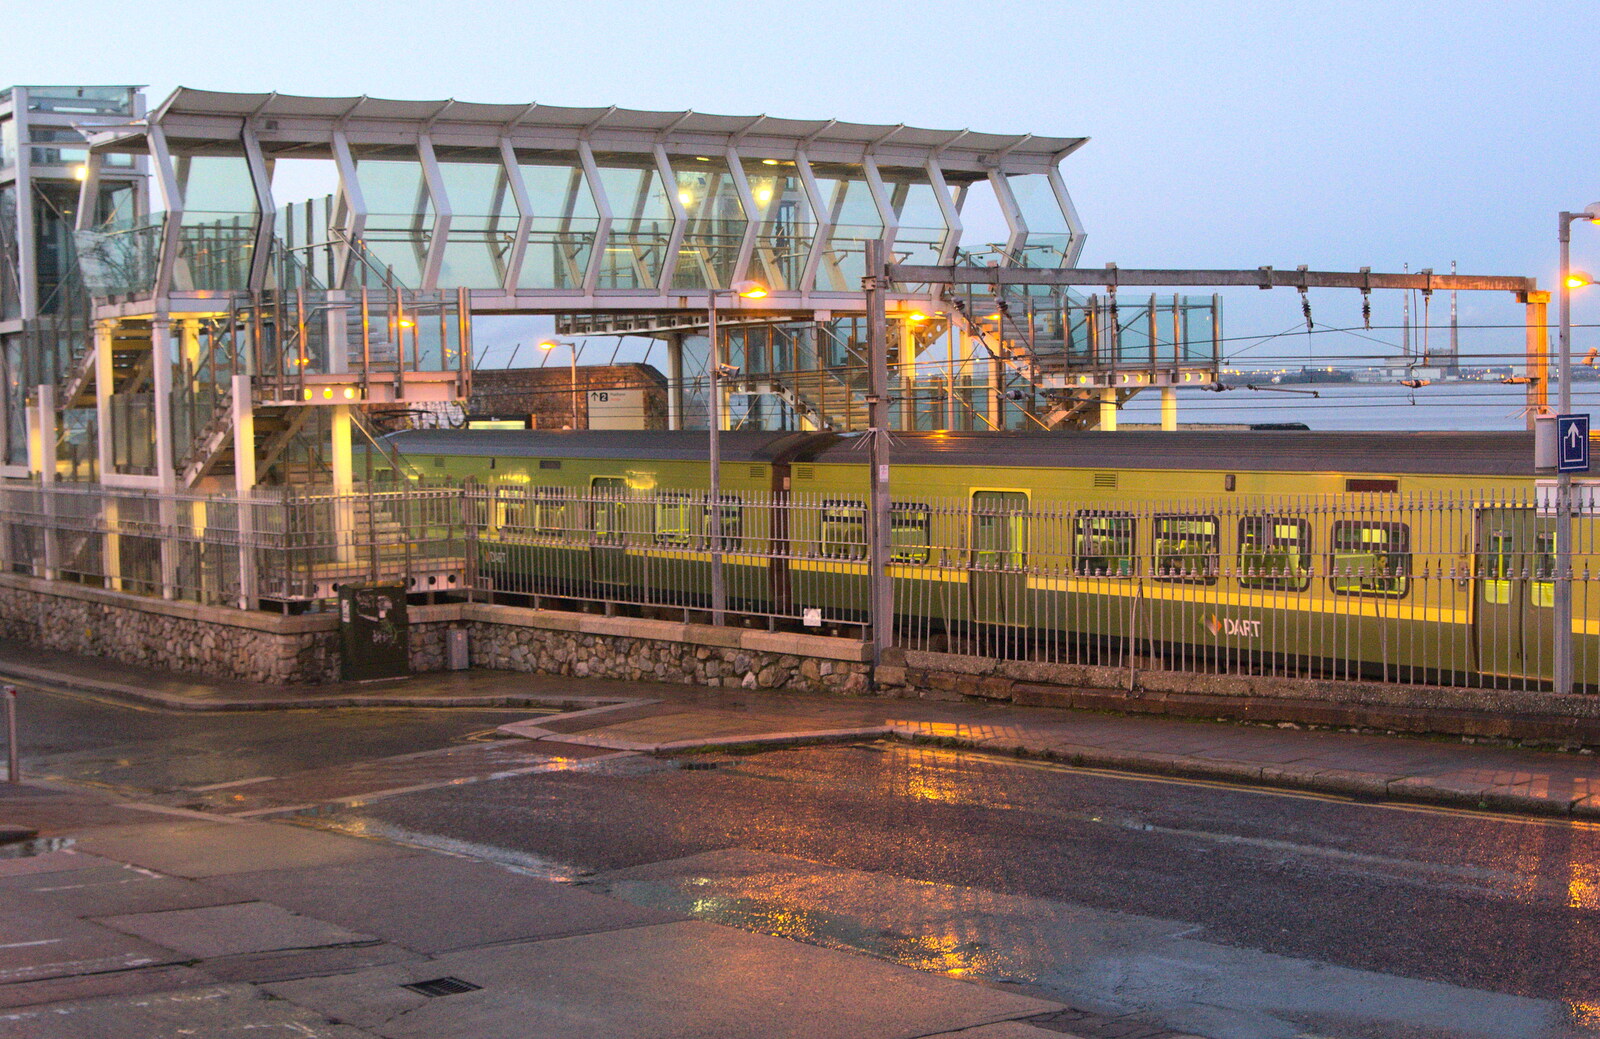 Another DART train trundles through from Christmas Eve in Dublin and Blackrock, Ireland - 24th December 2015